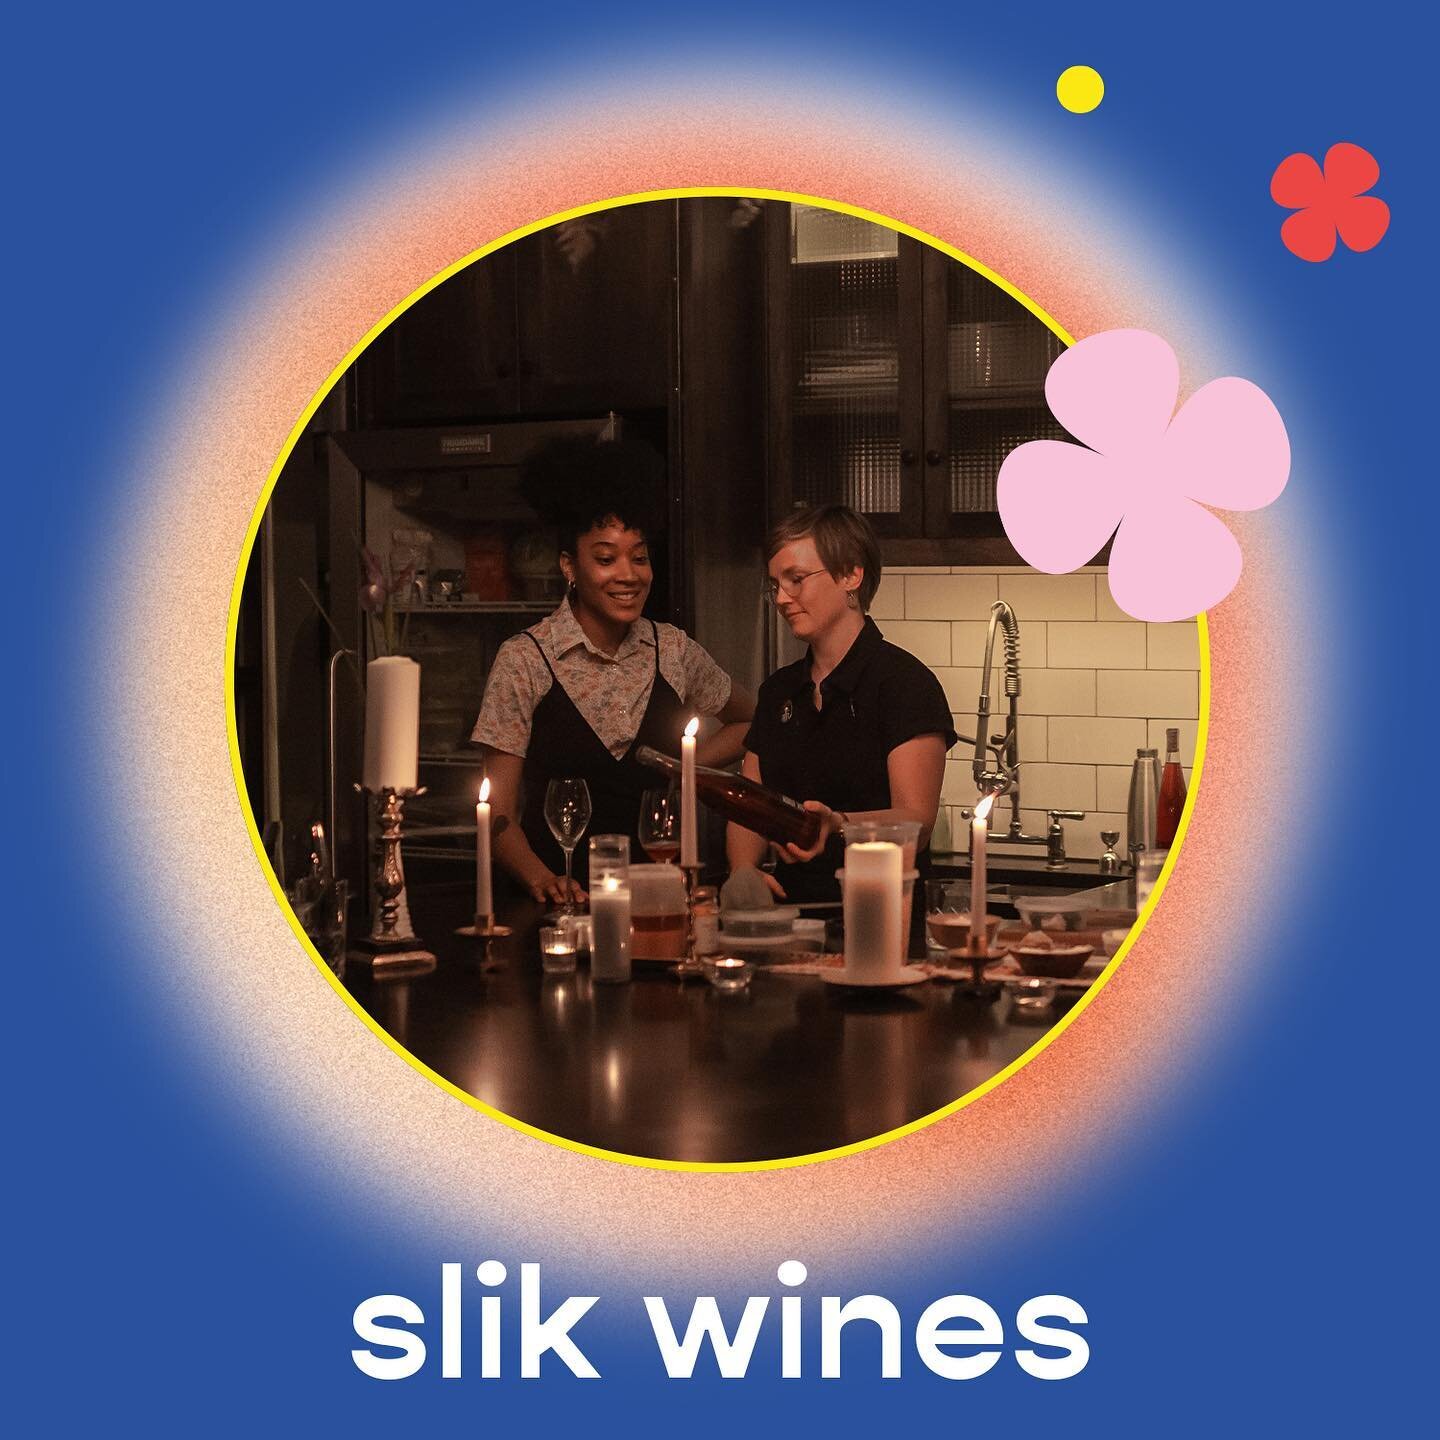 A theme we&rsquo;ve seen woven throughout our last few conversations is wine without pretense &mdash; @slikwines , cofounded by somms Kyla Peal &amp; Marie Cheslik, is no different and is drawing from their backgrounds in fine dining to help demystif